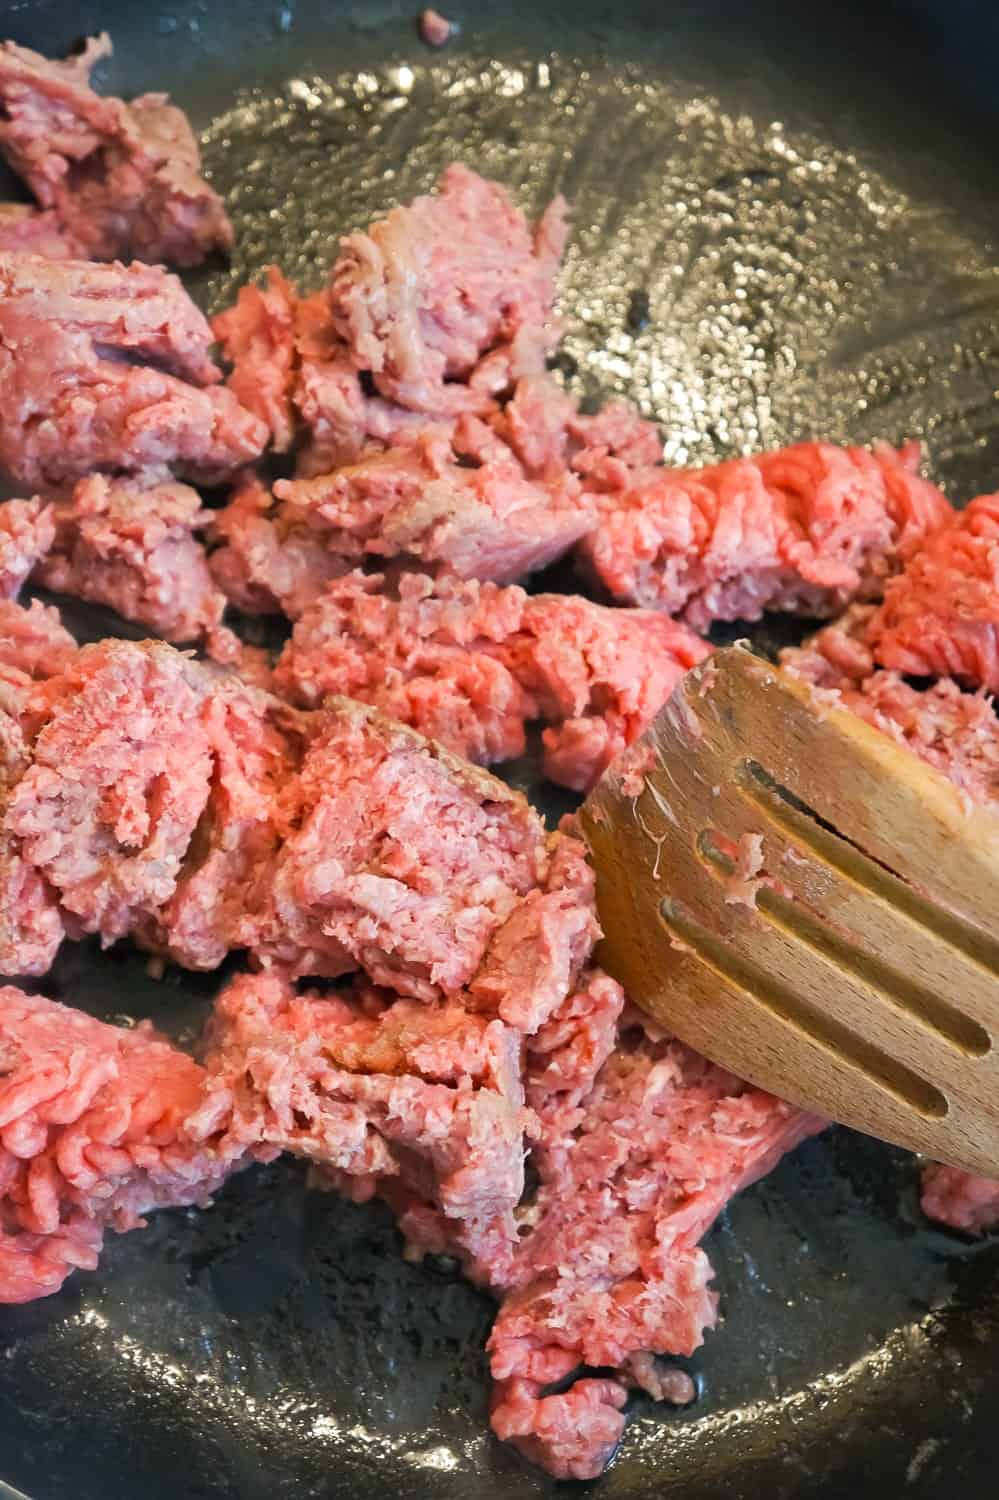 raw ground beef in a frying pan